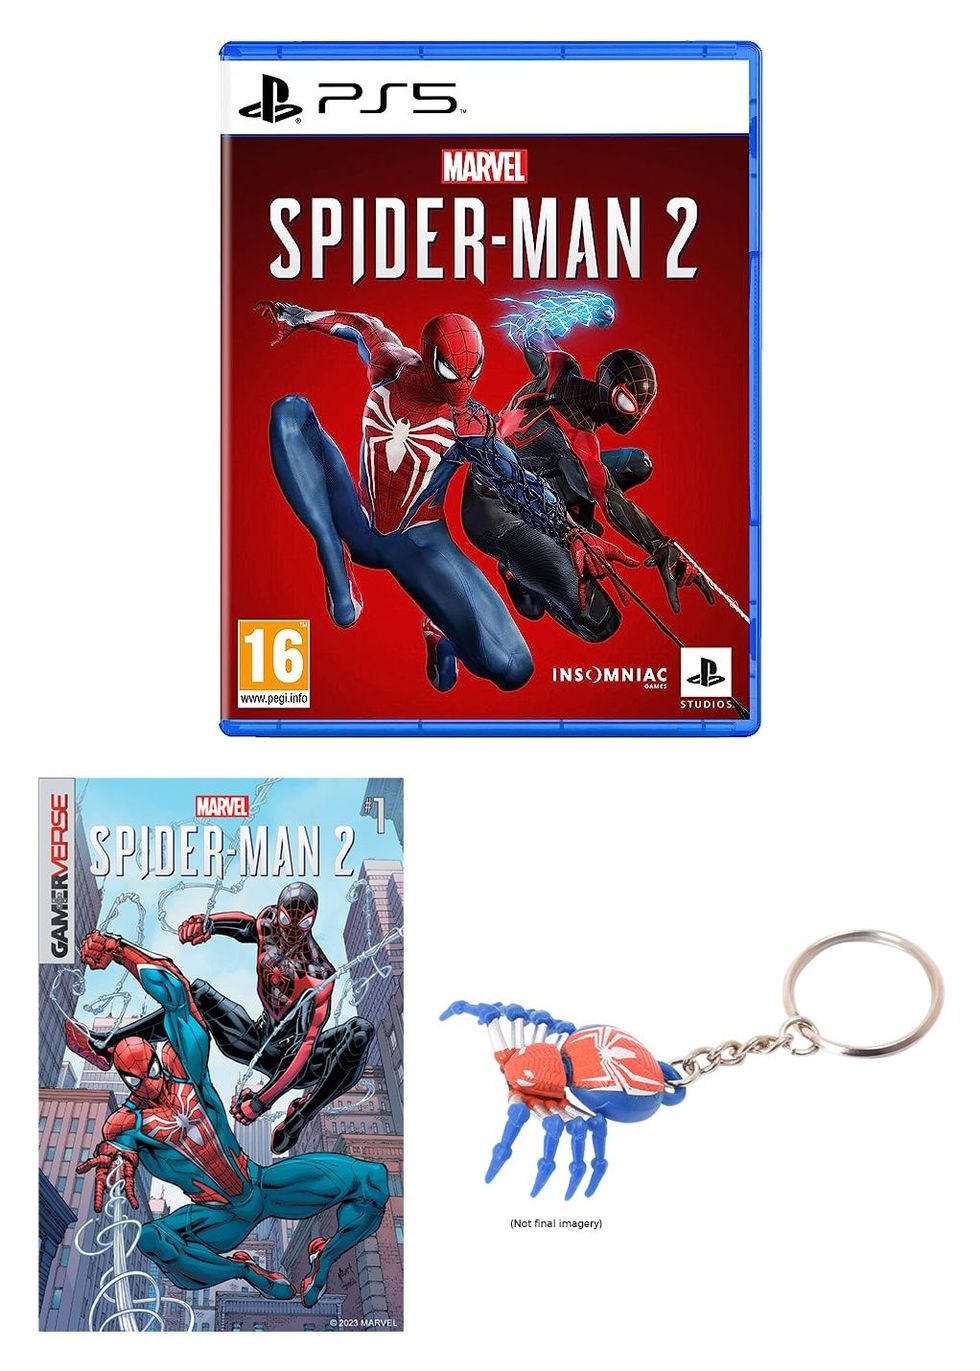 How to pre-order Spider-Man 2 Collector's Edition — price, release